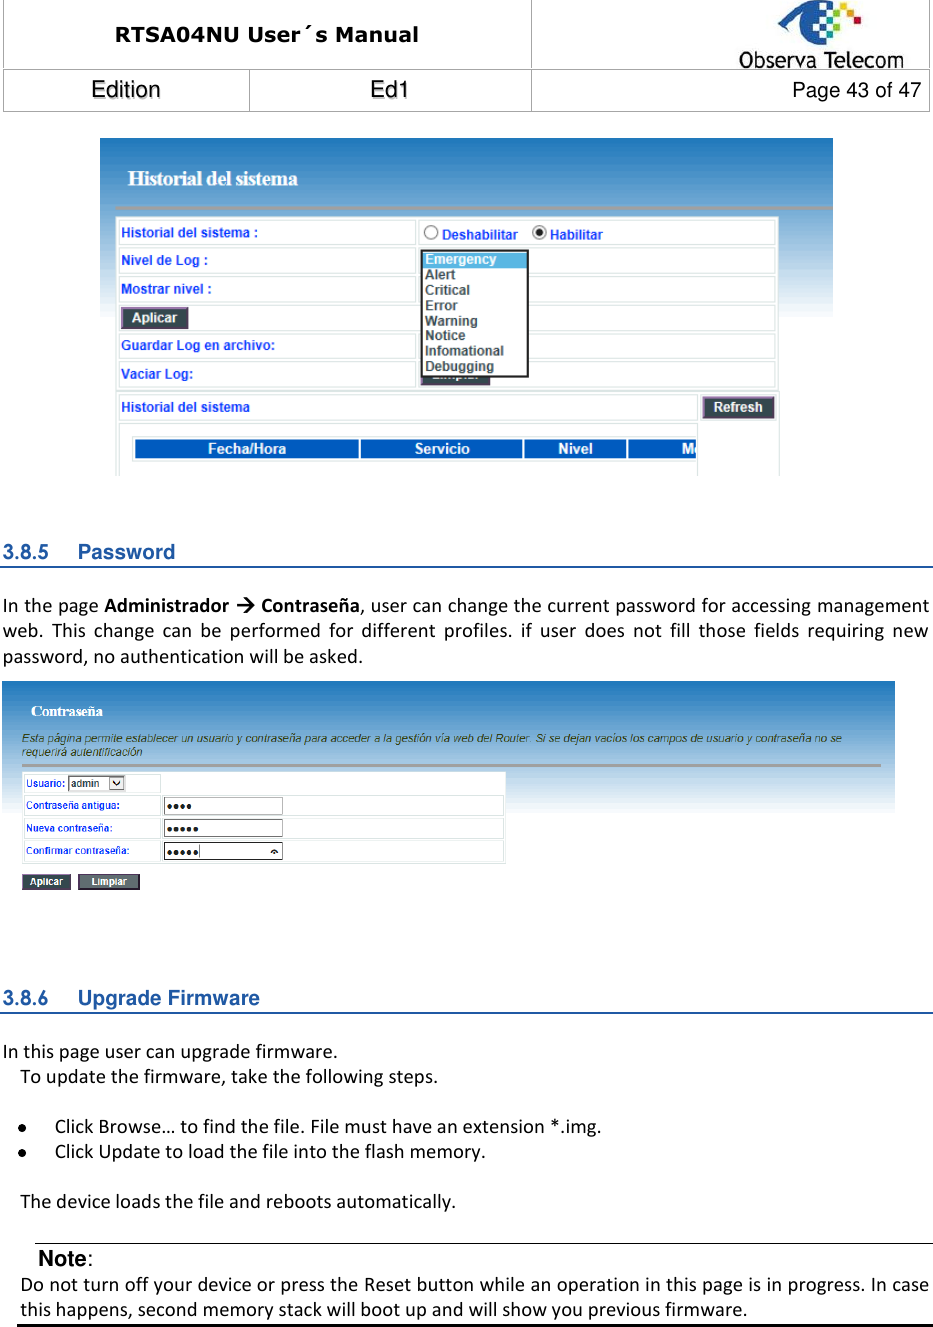 RTSA04NU User´s Manual  EEddiittiioonn  EEdd11  Page 43 of 47    3.8.5  Password In the page Administrador  Contraseña, user can change the current password for accessing management web.  This  change  can  be  performed  for  different  profiles.  if  user  does  not  fill  those  fields  requiring  new password, no authentication will be asked.   3.8.6  Upgrade Firmware In this page user can upgrade firmware. To update the firmware, take the following steps.   Click Browse… to find the file. File must have an extension *.img.  Click Update to load the file into the flash memory.  The device loads the file and reboots automatically. Note: Do not turn off your device or press the Reset button while an operation in this page is in progress. In case this happens, second memory stack will boot up and will show you previous firmware.   